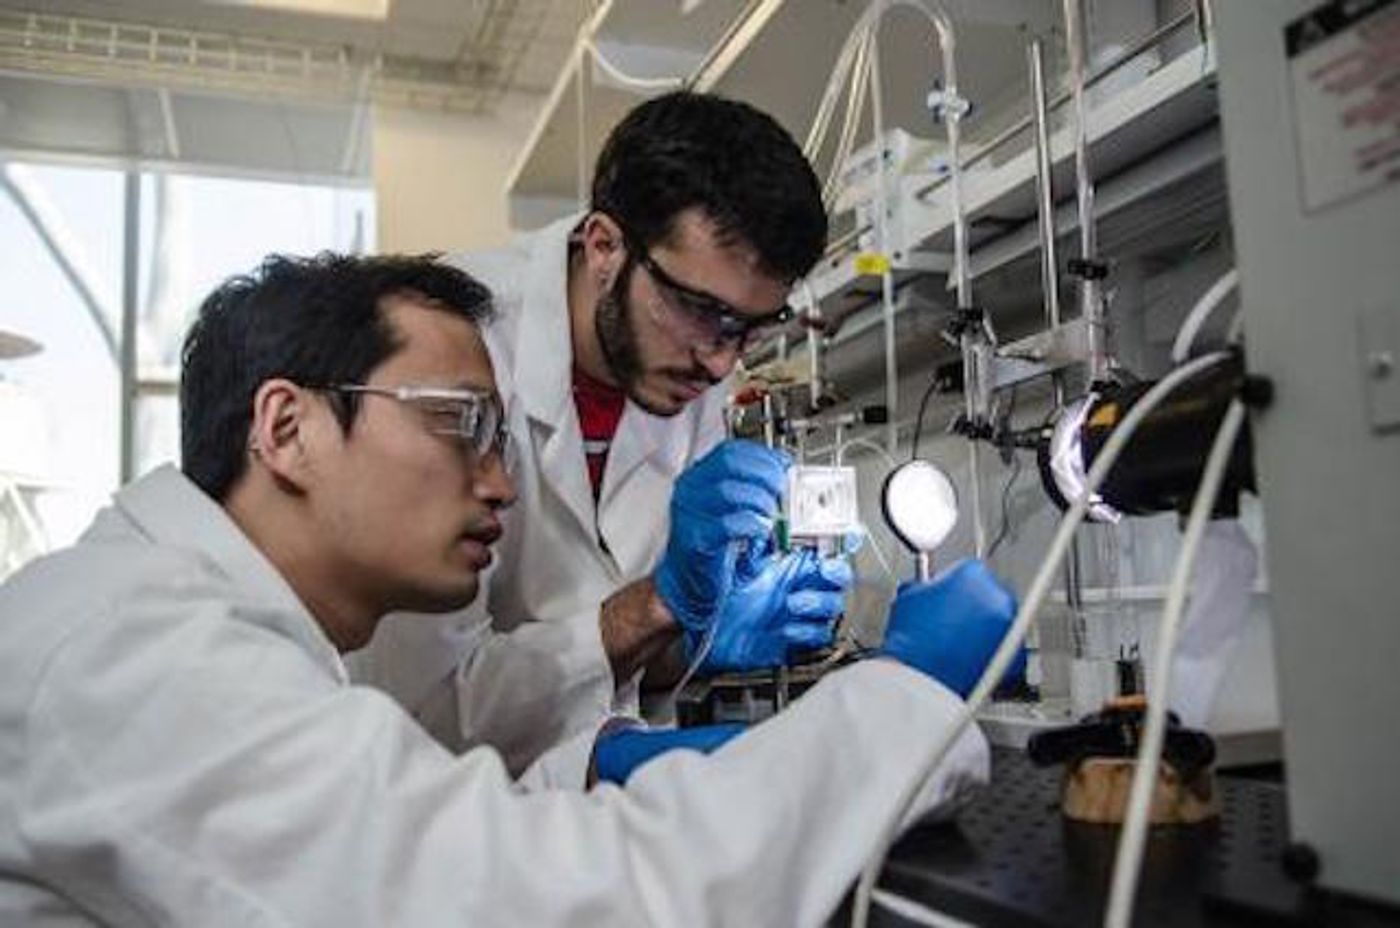 Chengxiang Xiang and Erik Verlage, JCAP team members, assemble part of the artificial leaf.